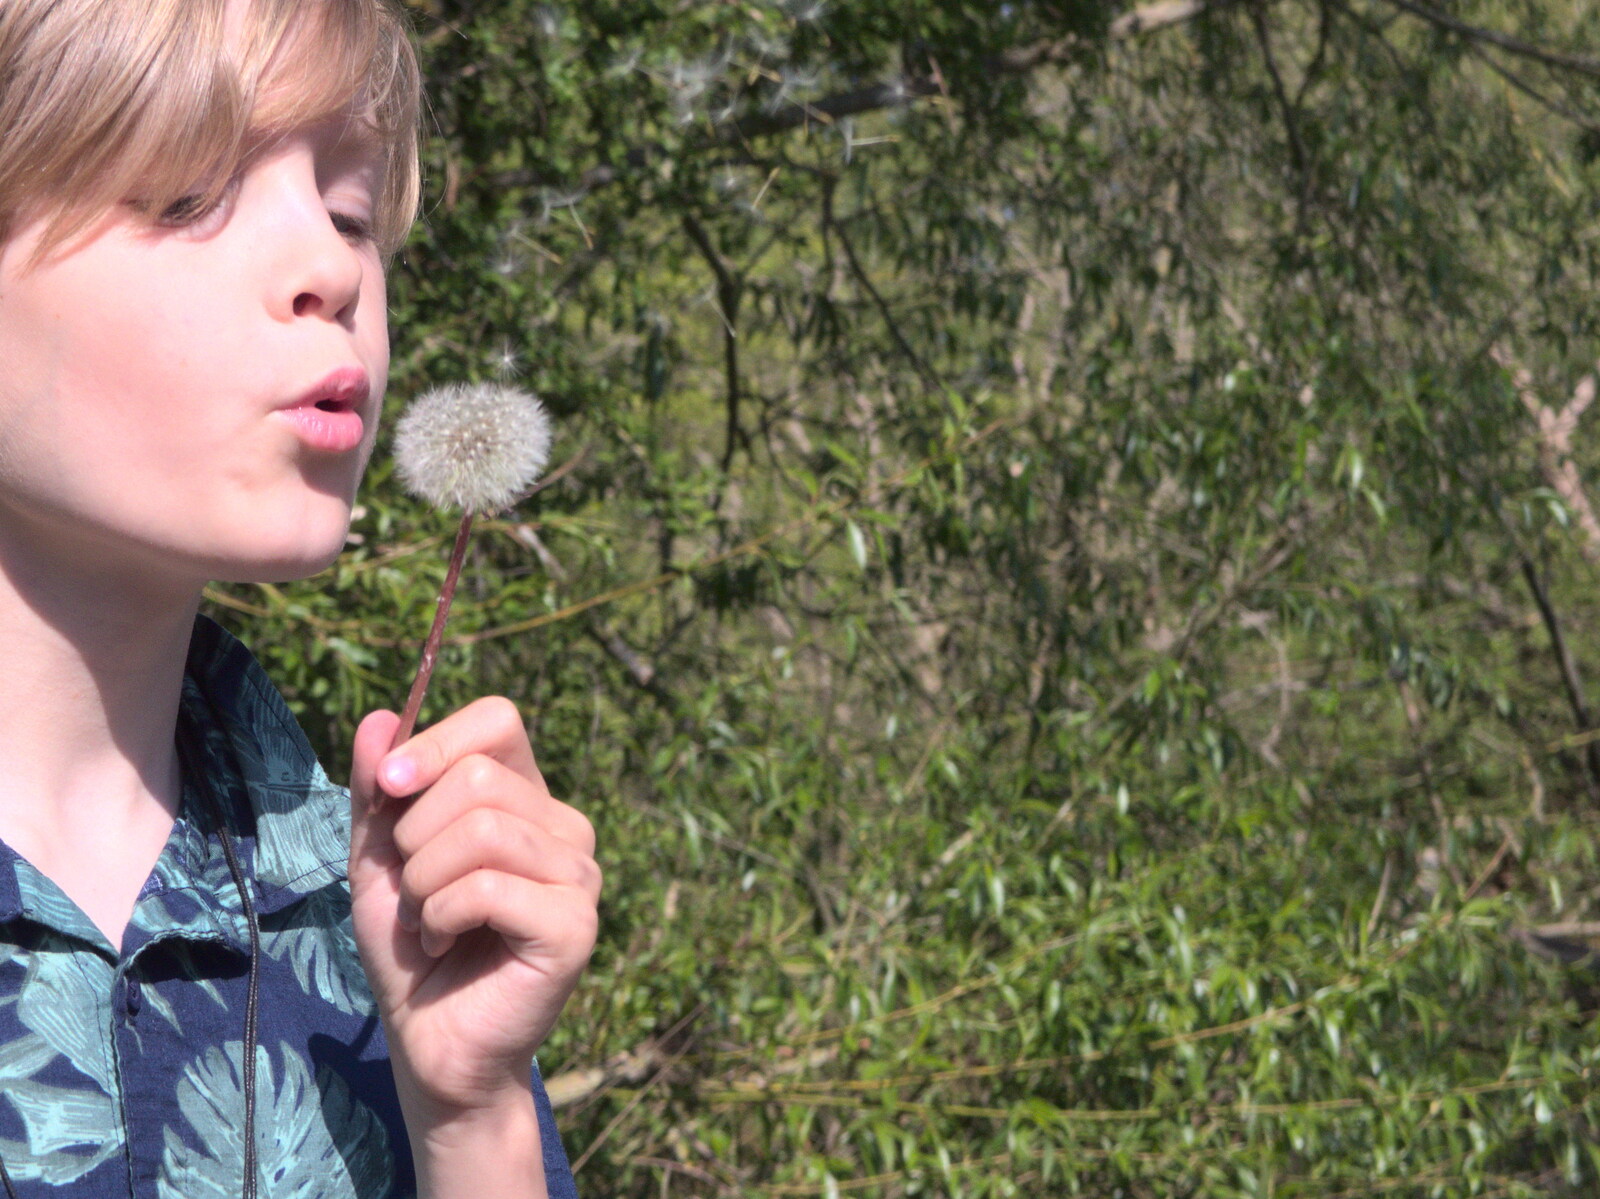 Harry blows on a dandelion head from The Old Brickworks and a New Road, Hoxne and Eye, Suffolk - 26th May 2020